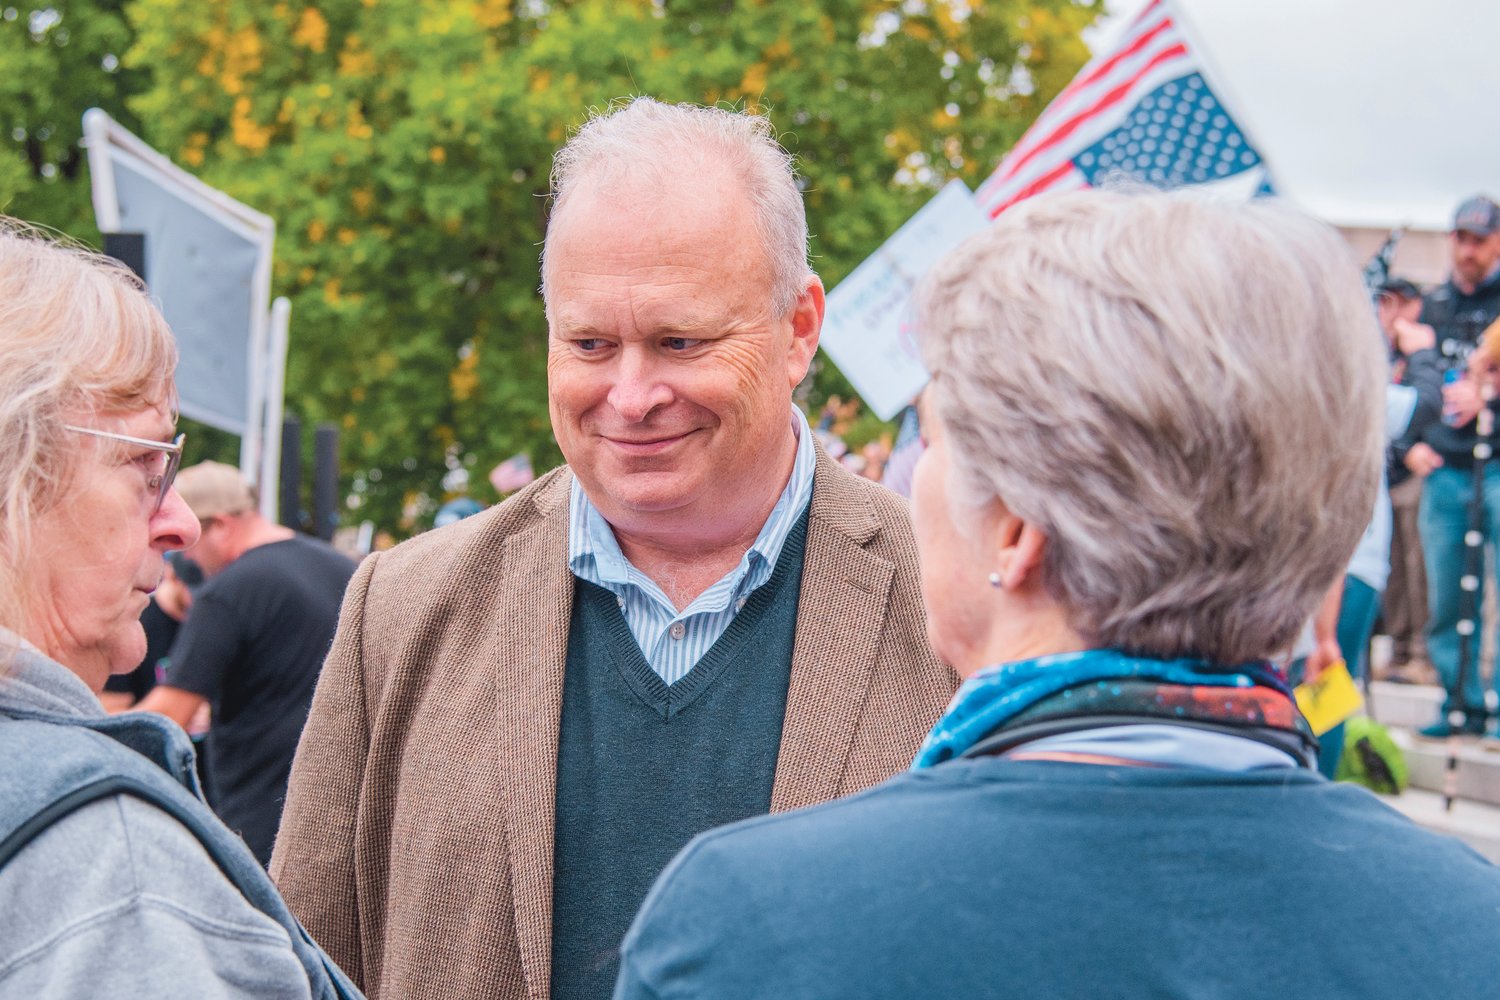 Representative Jim Walsh smiles while mingling with attendees of a “Medical Freedom Rally” outside the Washington State Capitol Building in October 2021.